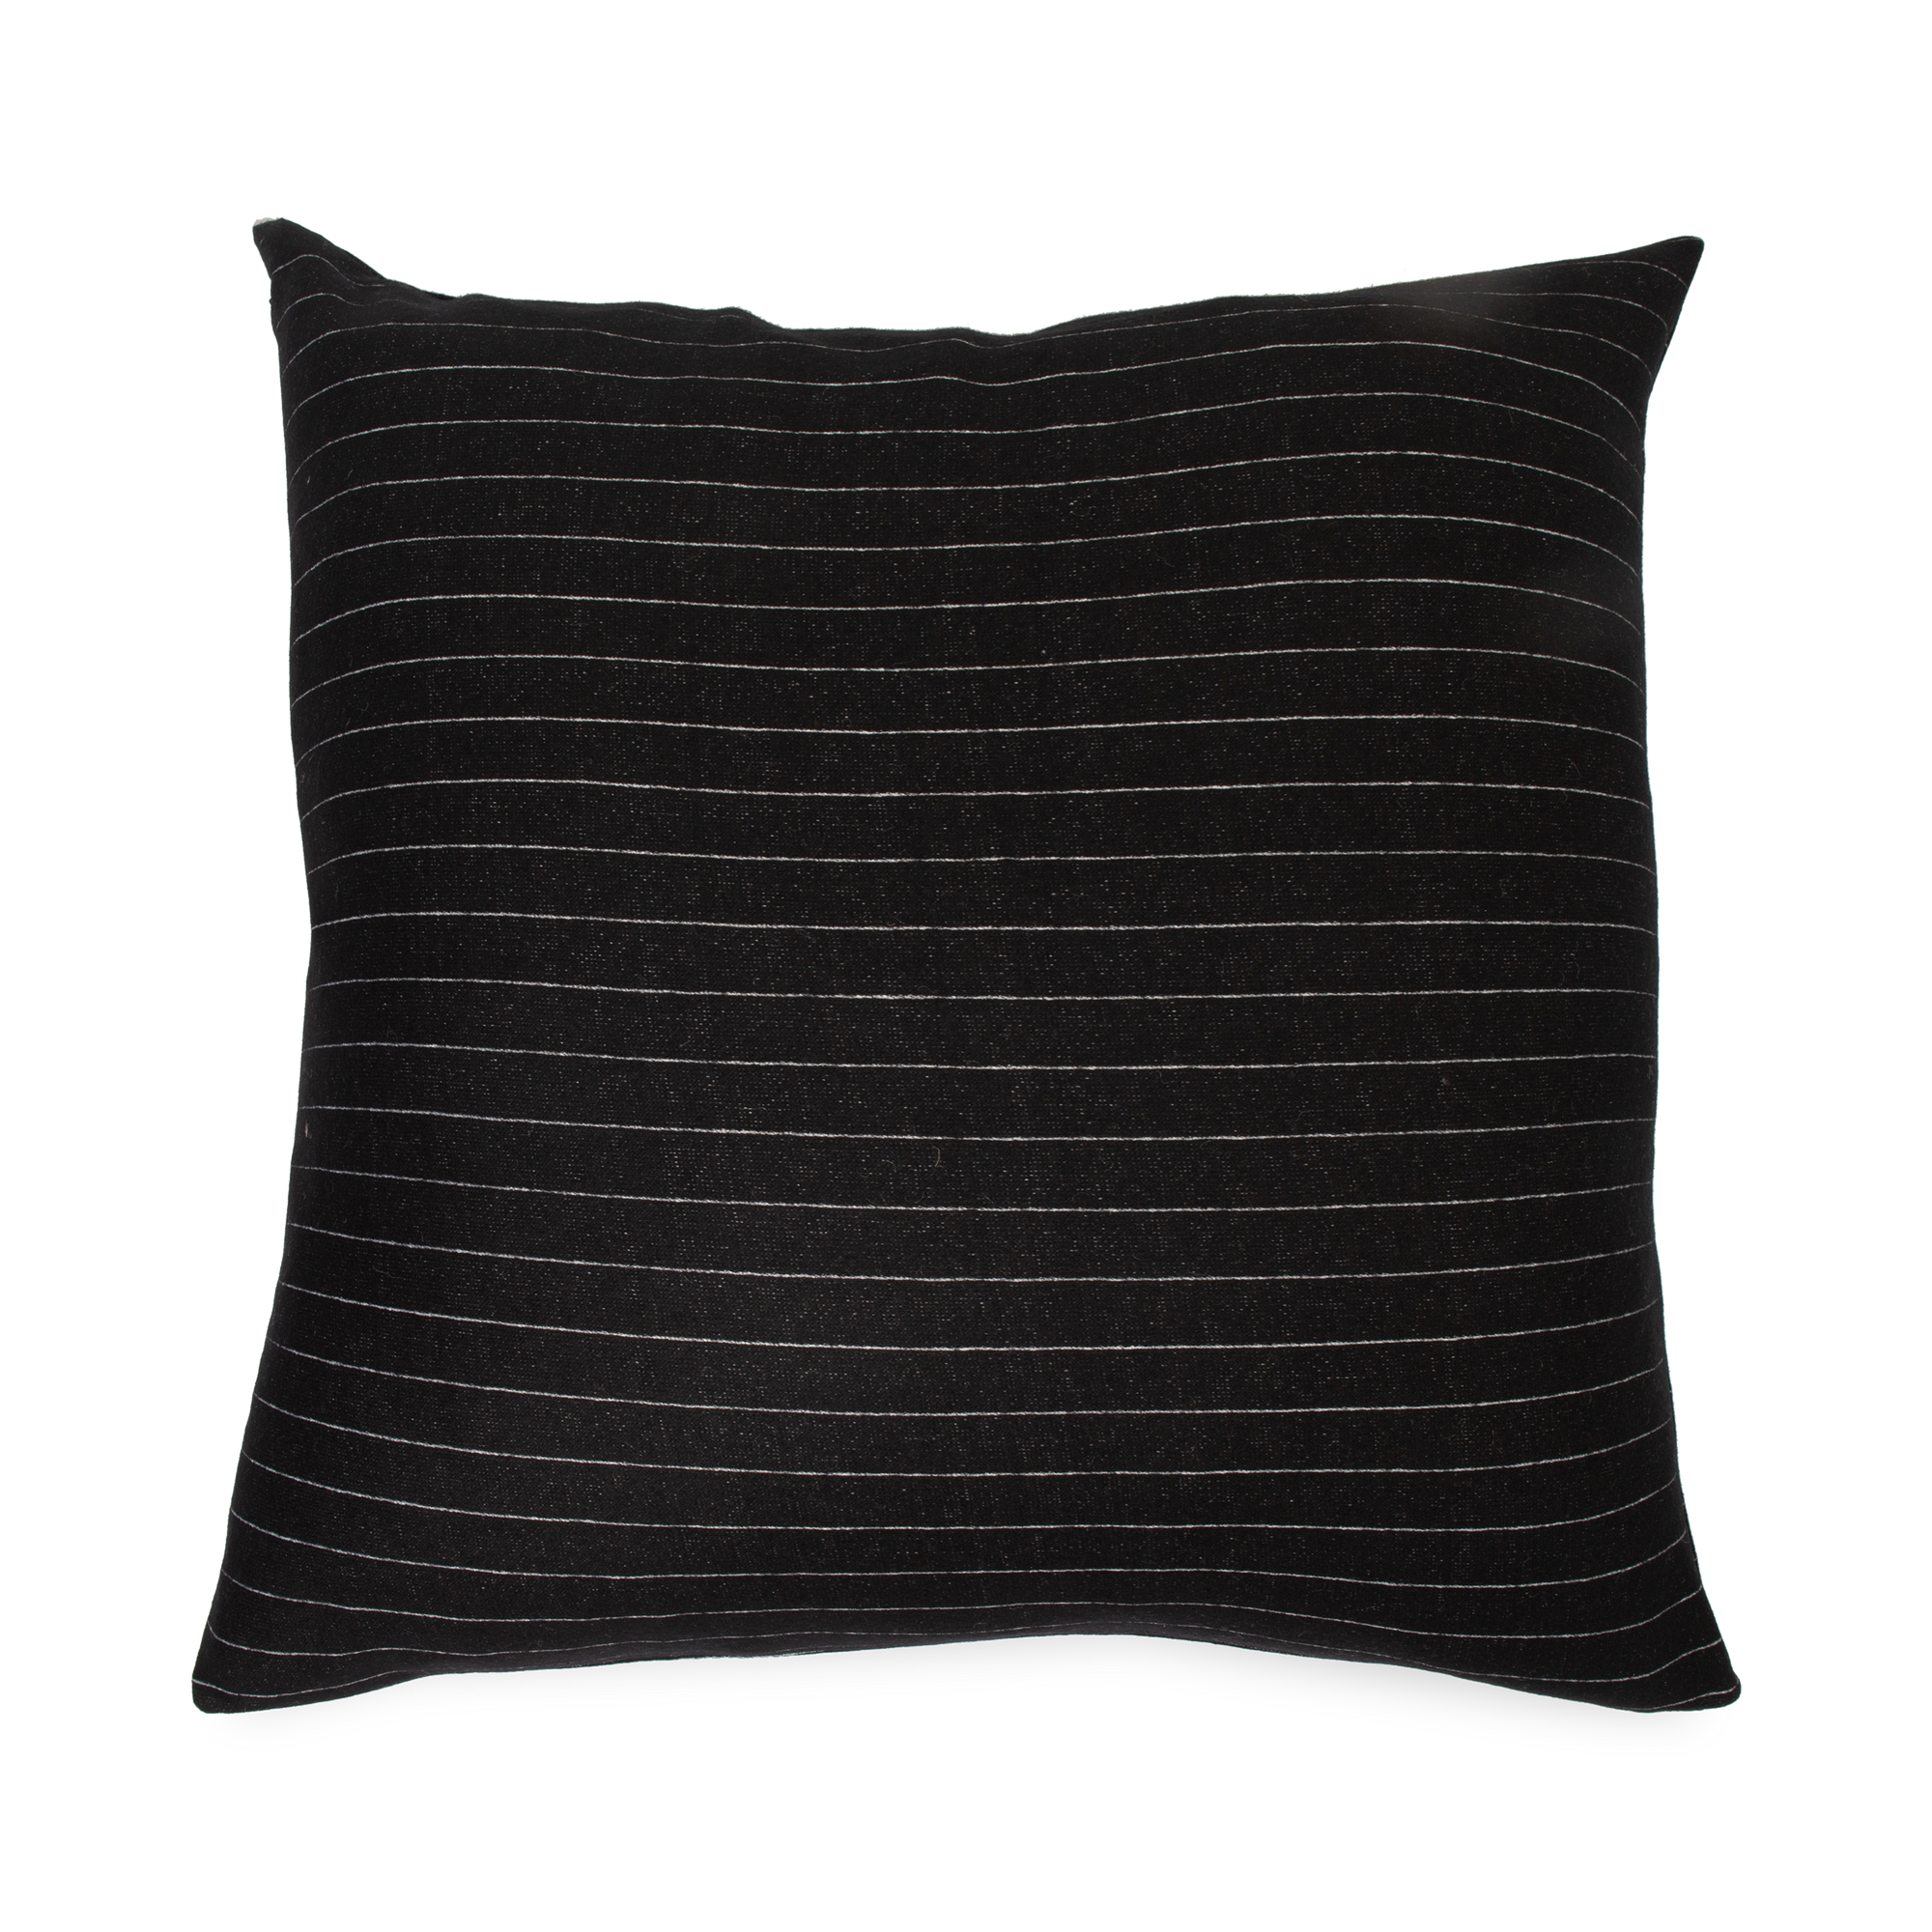 This minimal Pinstripe Pillow features slim white lines.